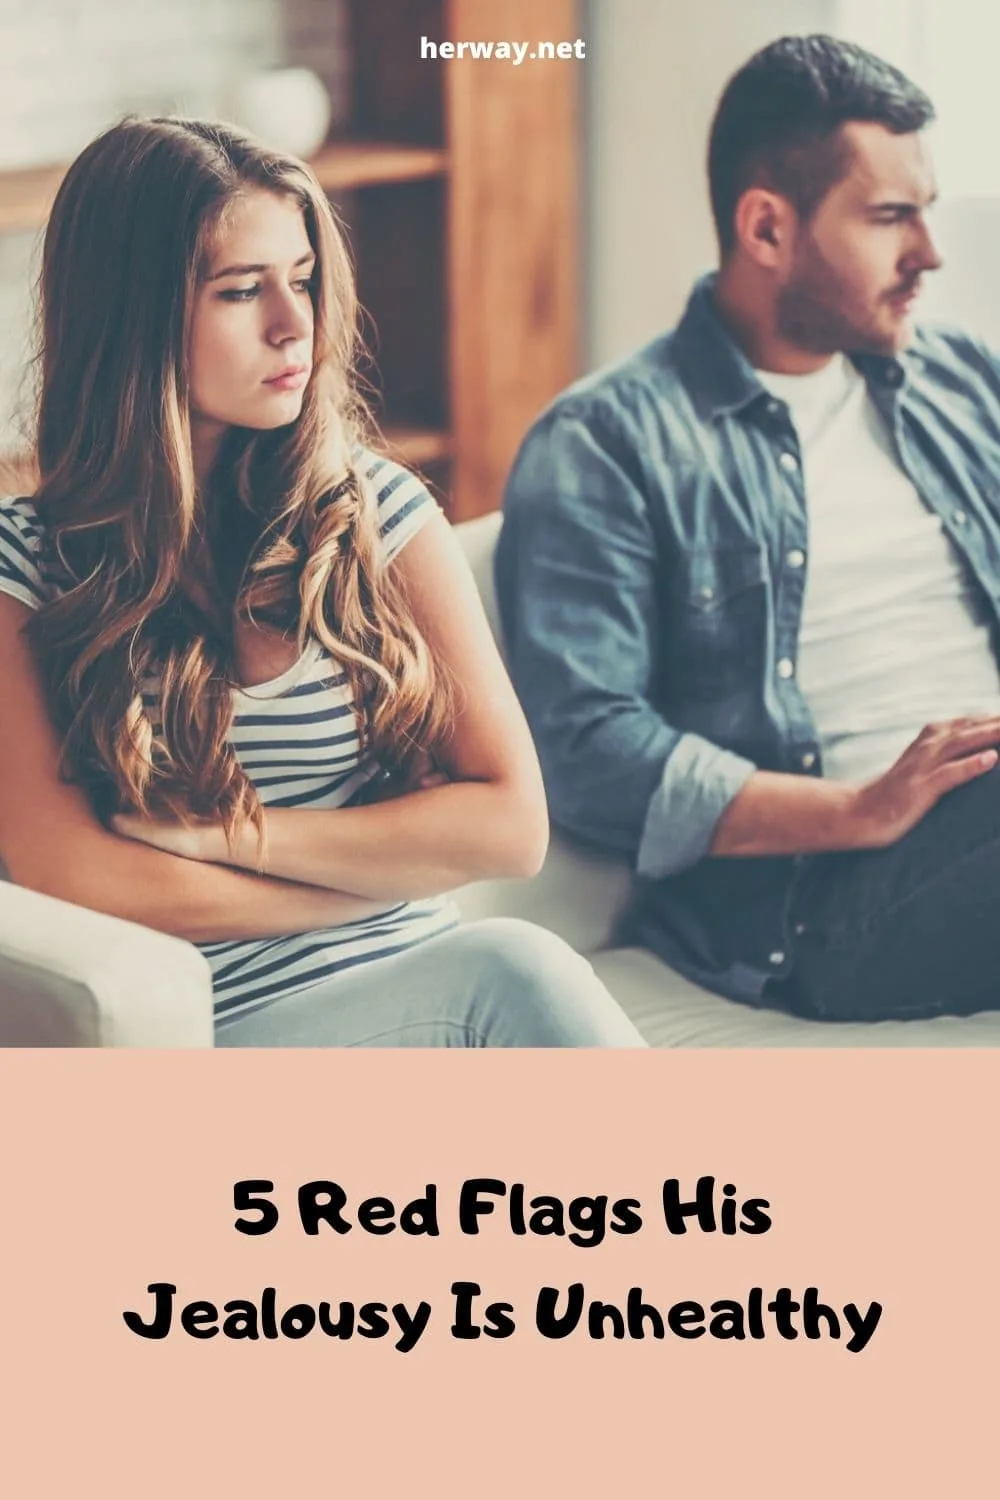 5 Red Flags His Jealousy Is Unhealthy